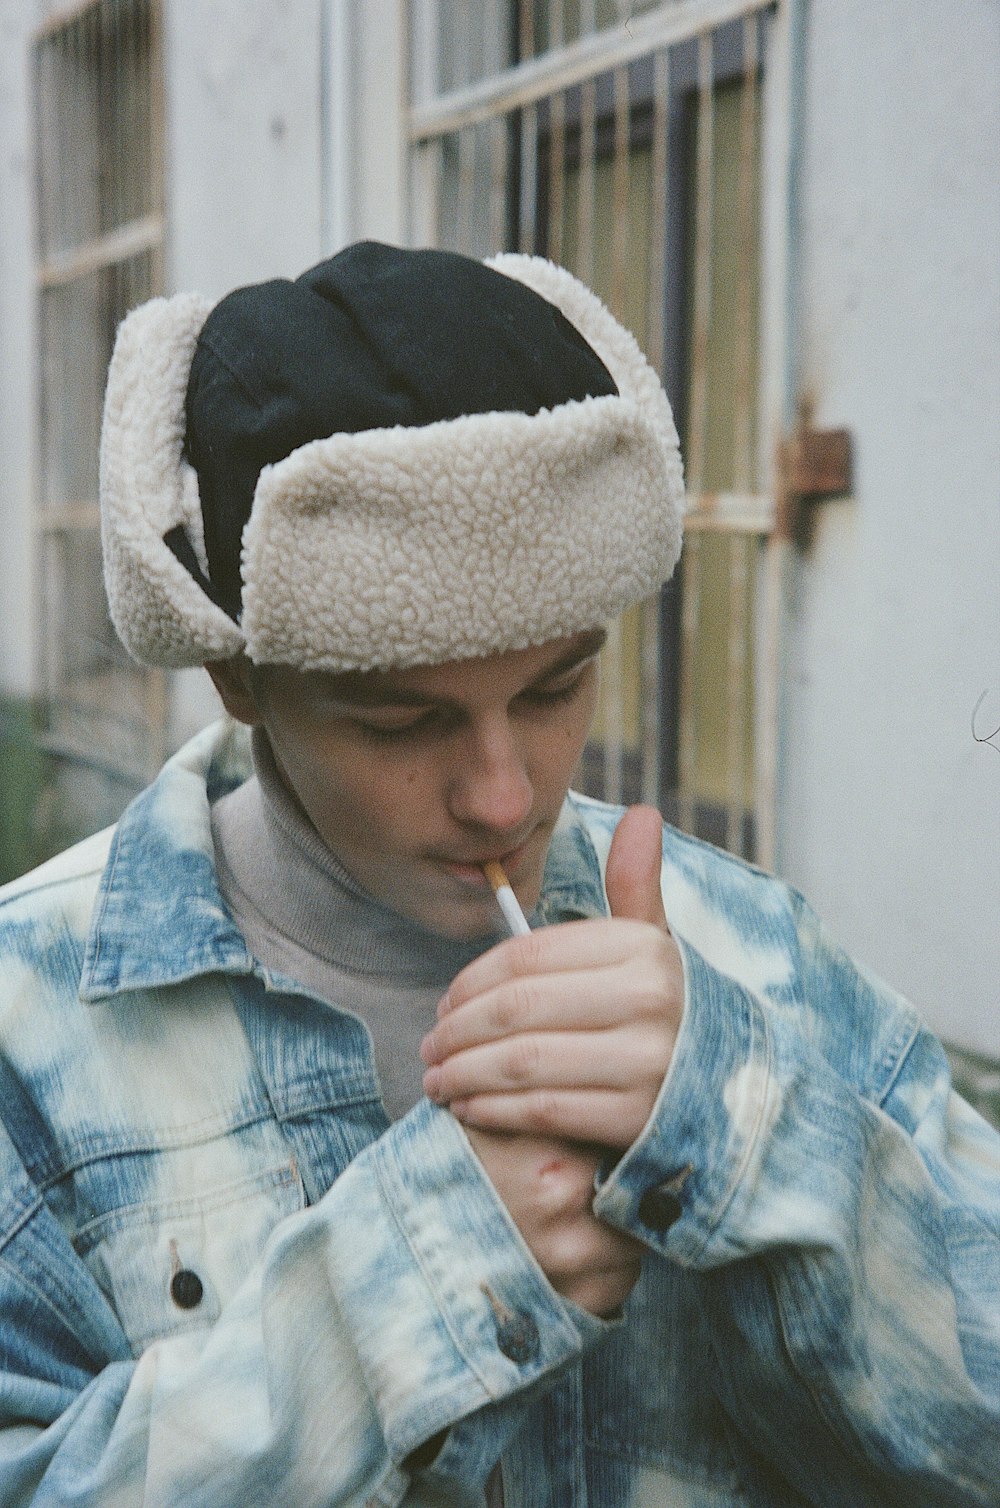 a young man smoking a cigarette wearing a hat